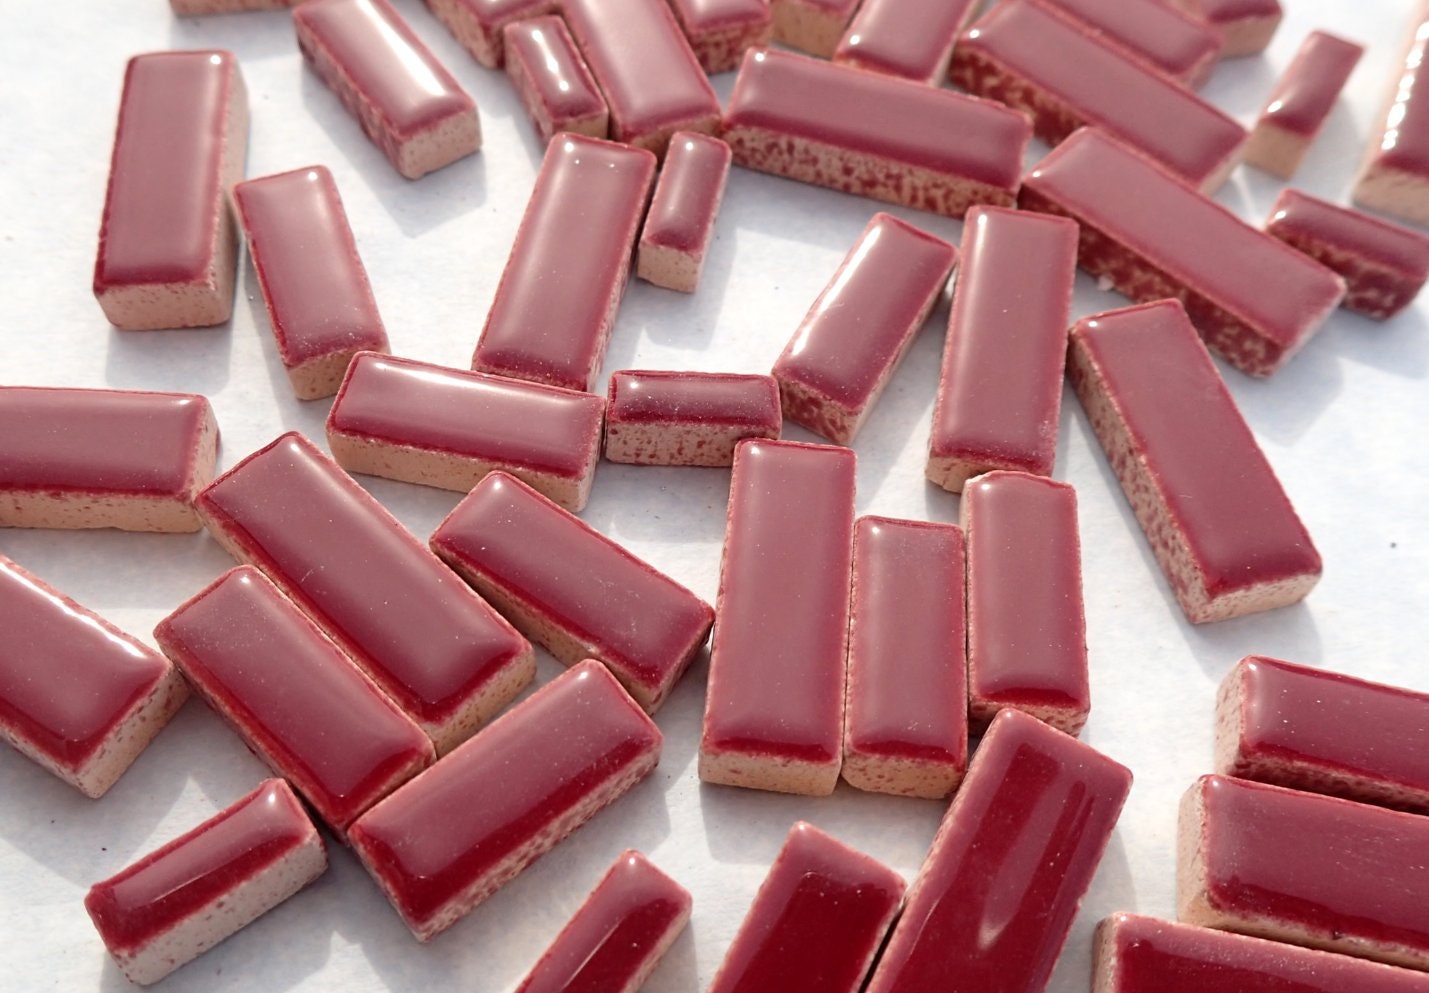 Burgundy Mini Rectangles Mosaic Tiles - 50g Ceramic in Mix of 3 Sizes 3/8" and 5/8" and 3/4"